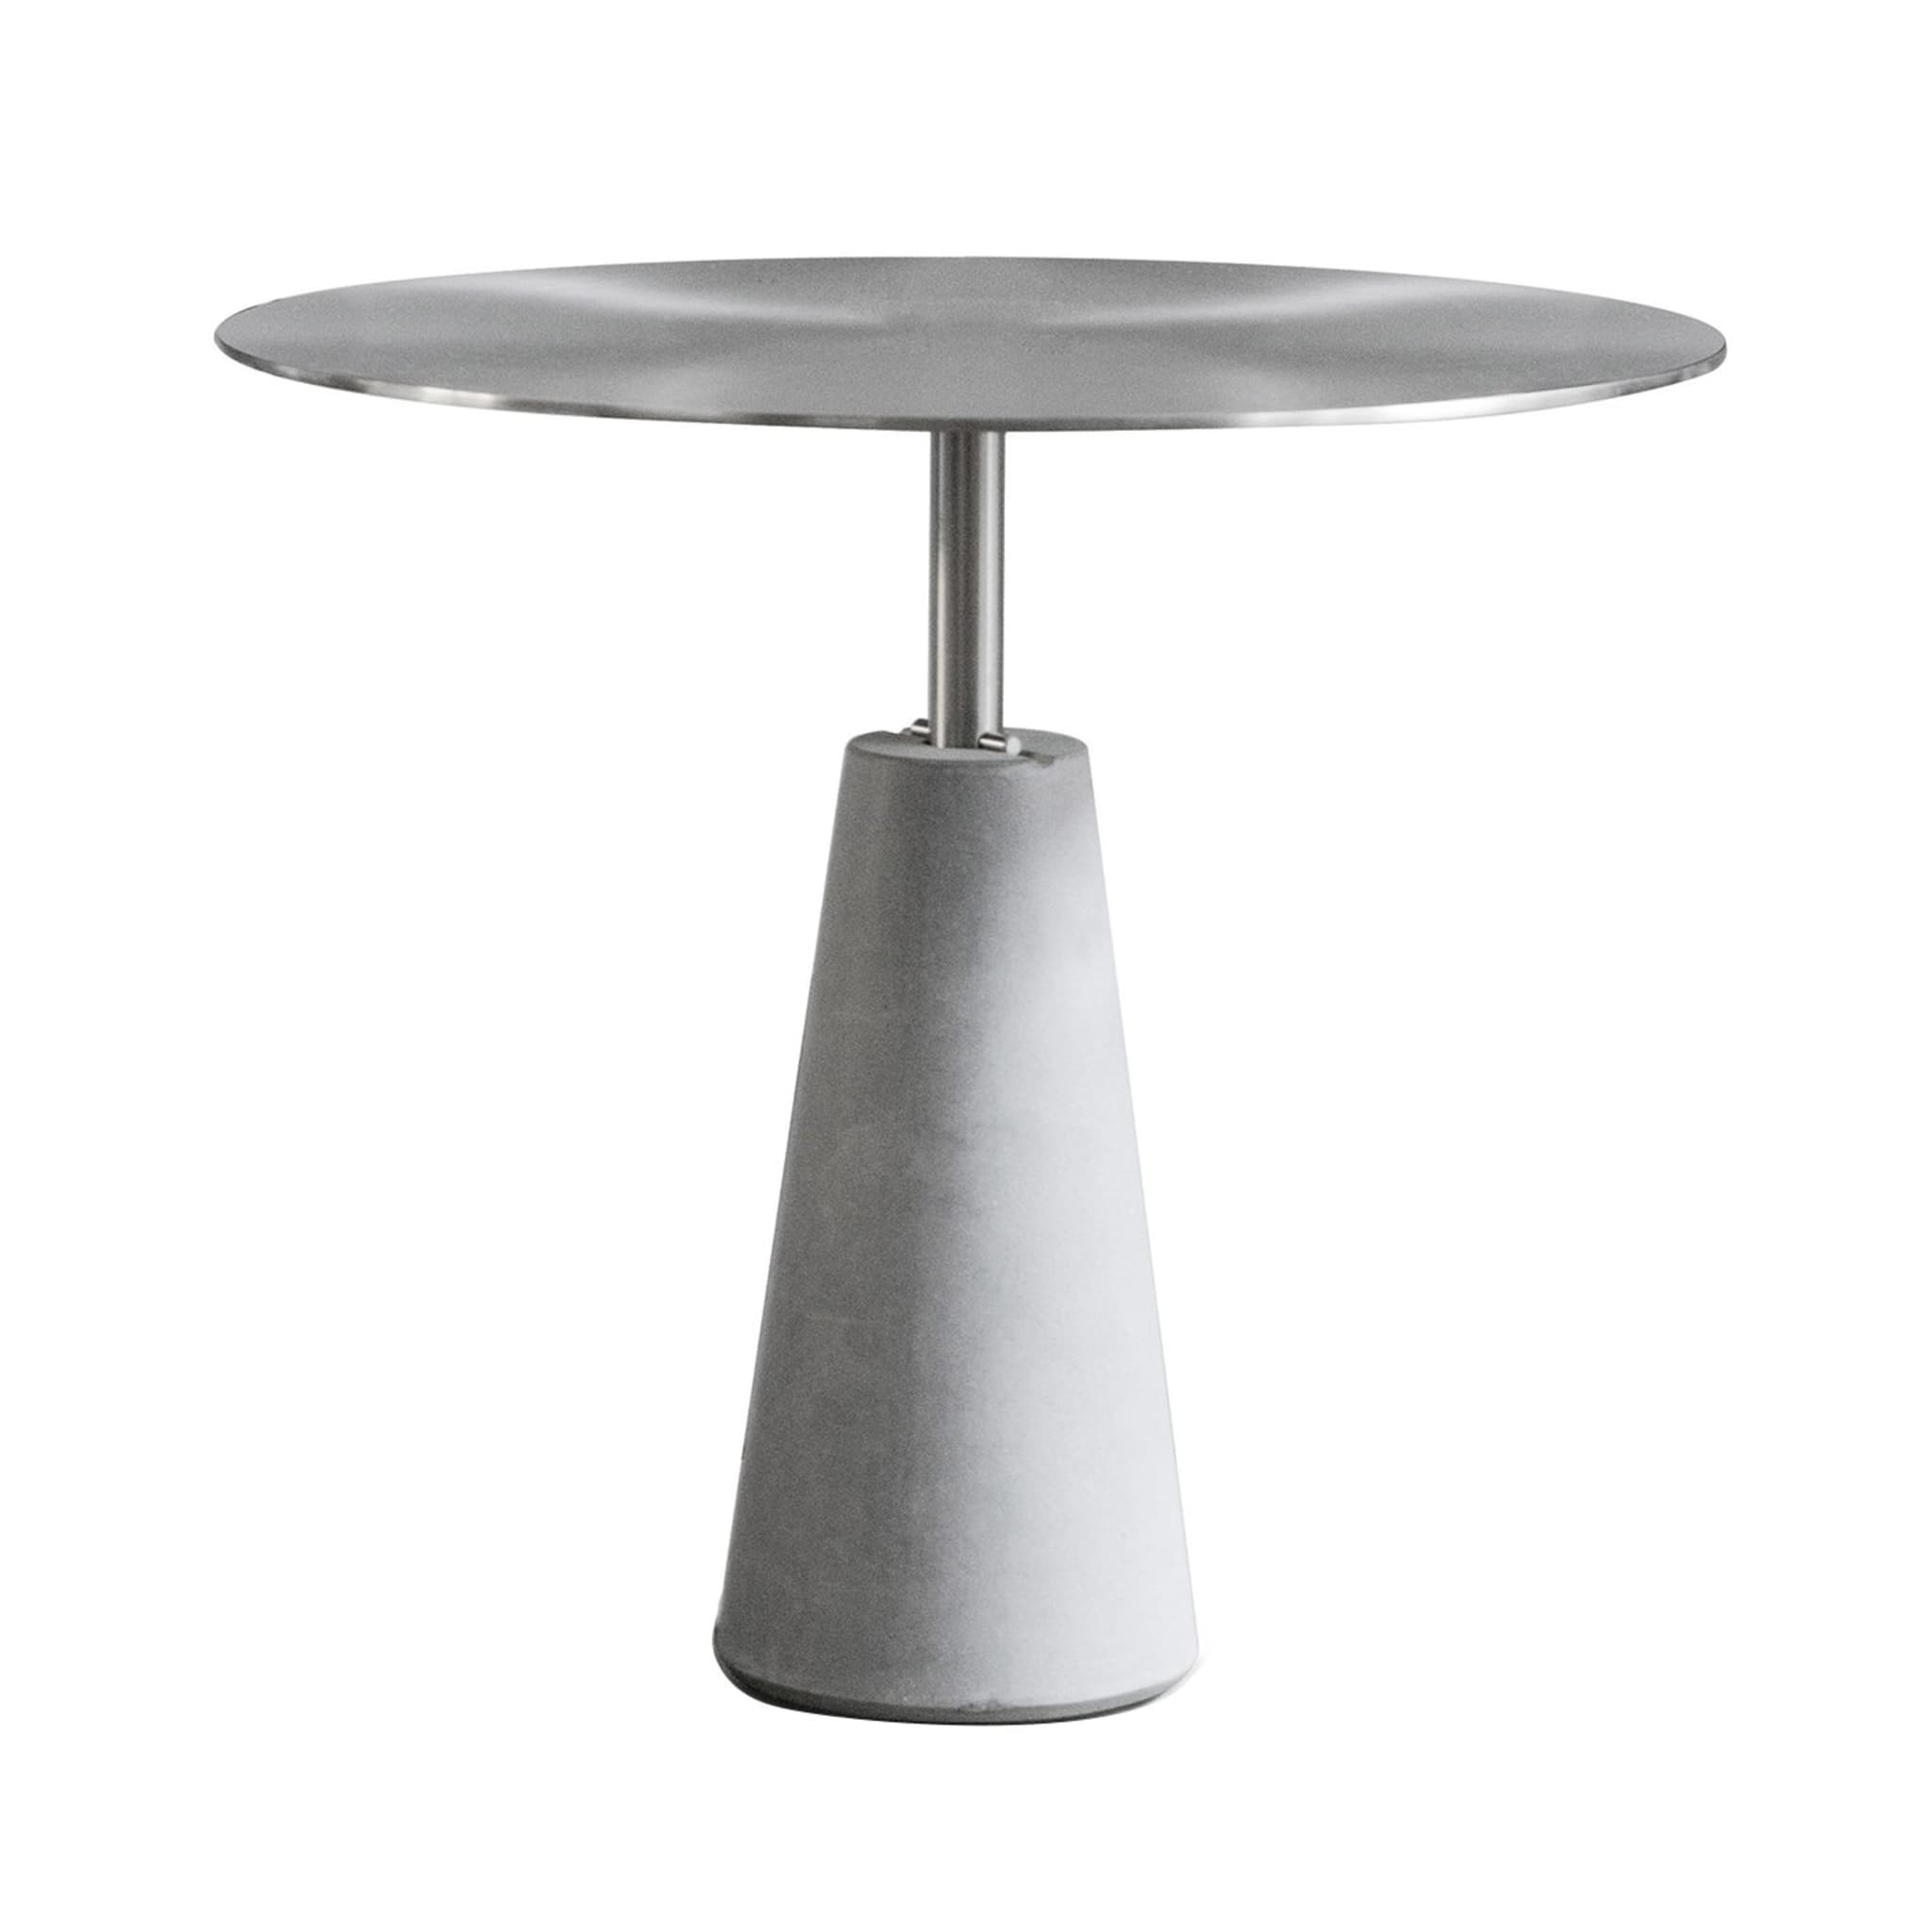 Ed004 Steel and White Stone Side Table - Main view